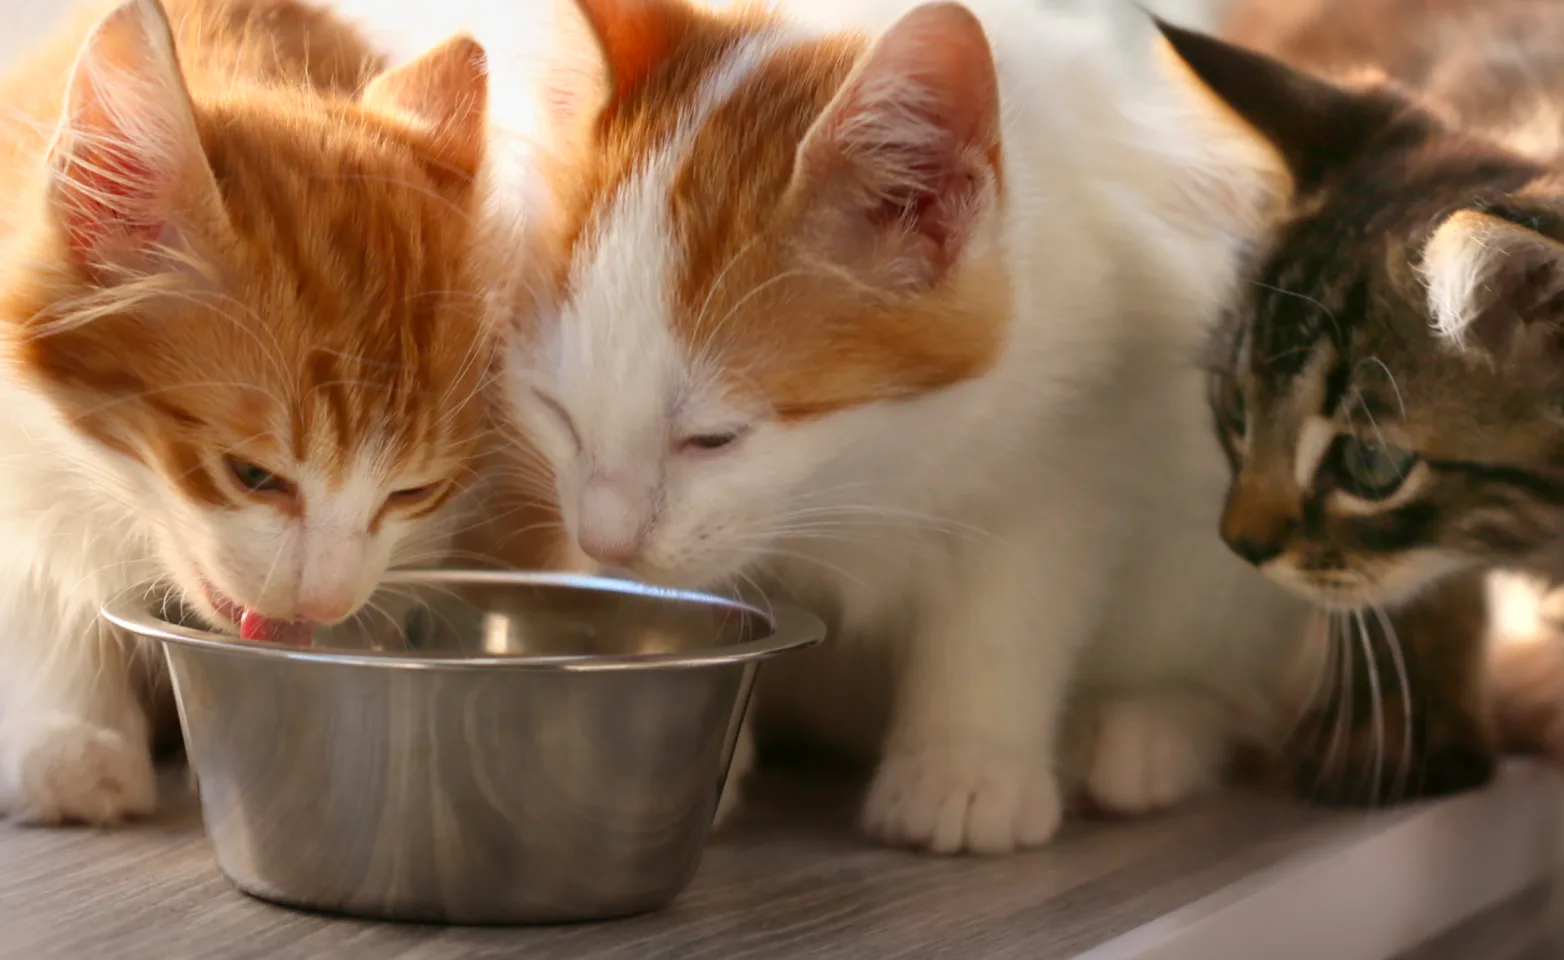 Cat eating cat food out of bowl